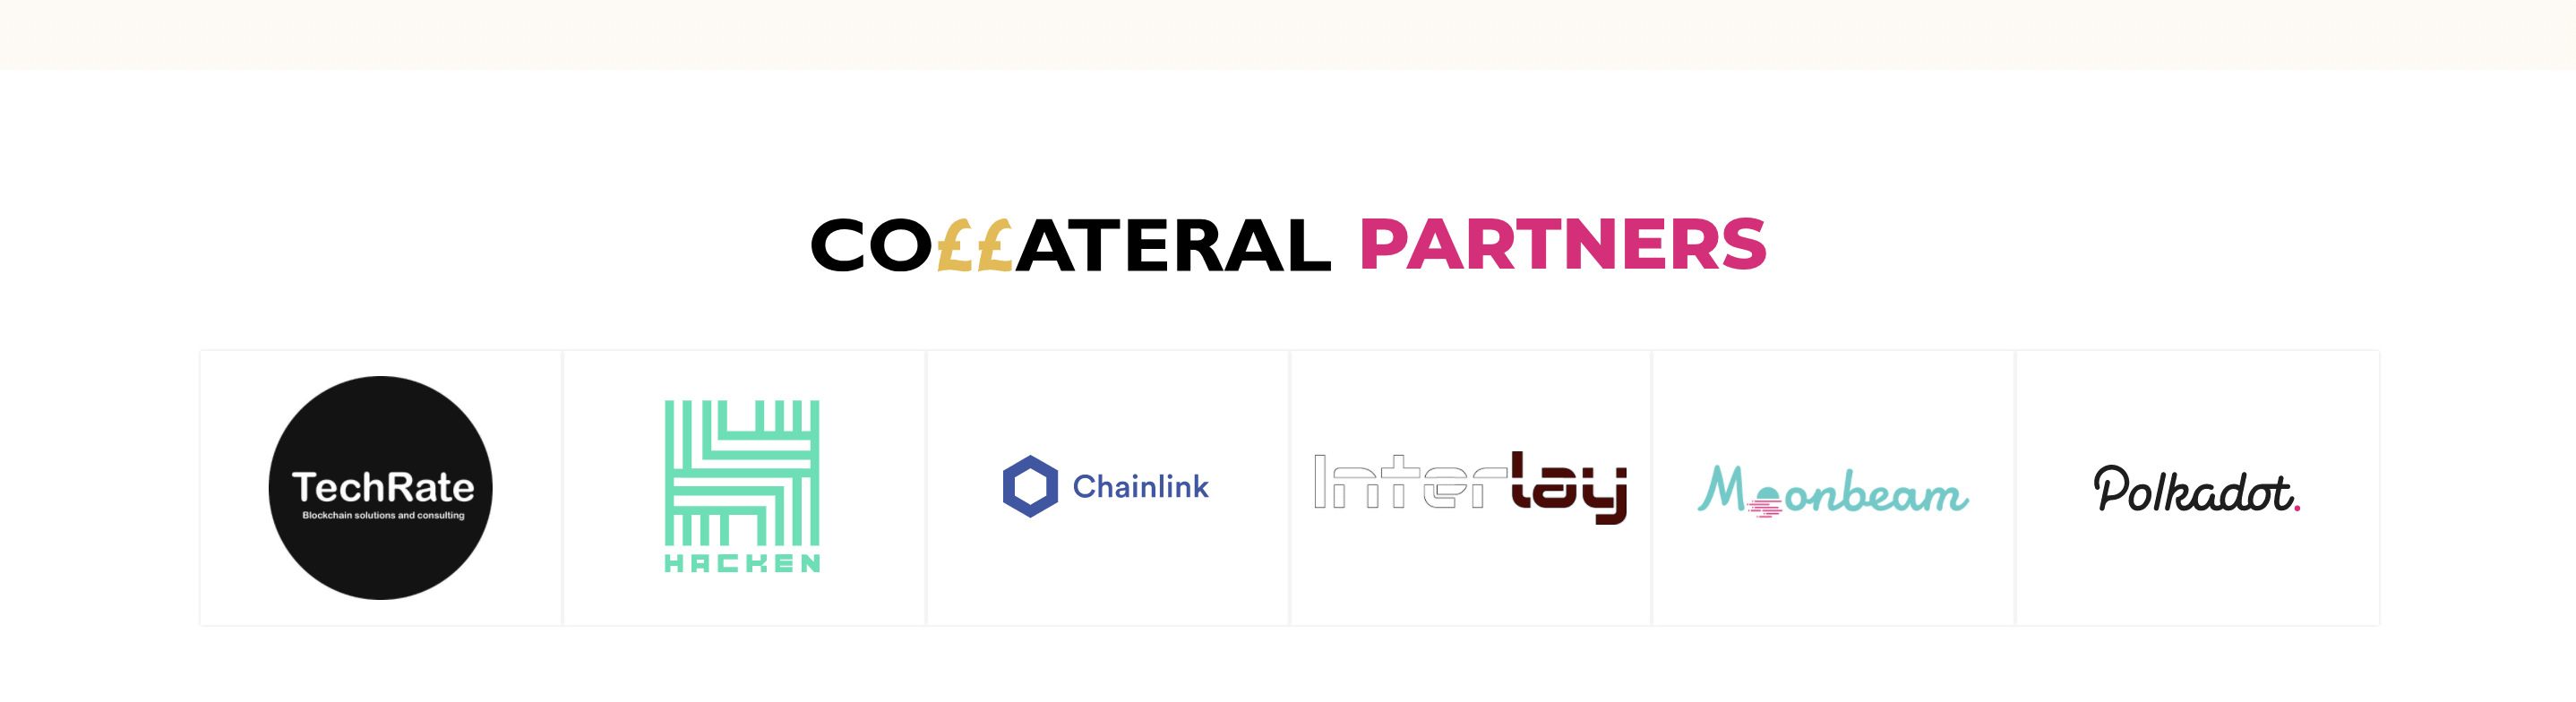 Collateral Partners